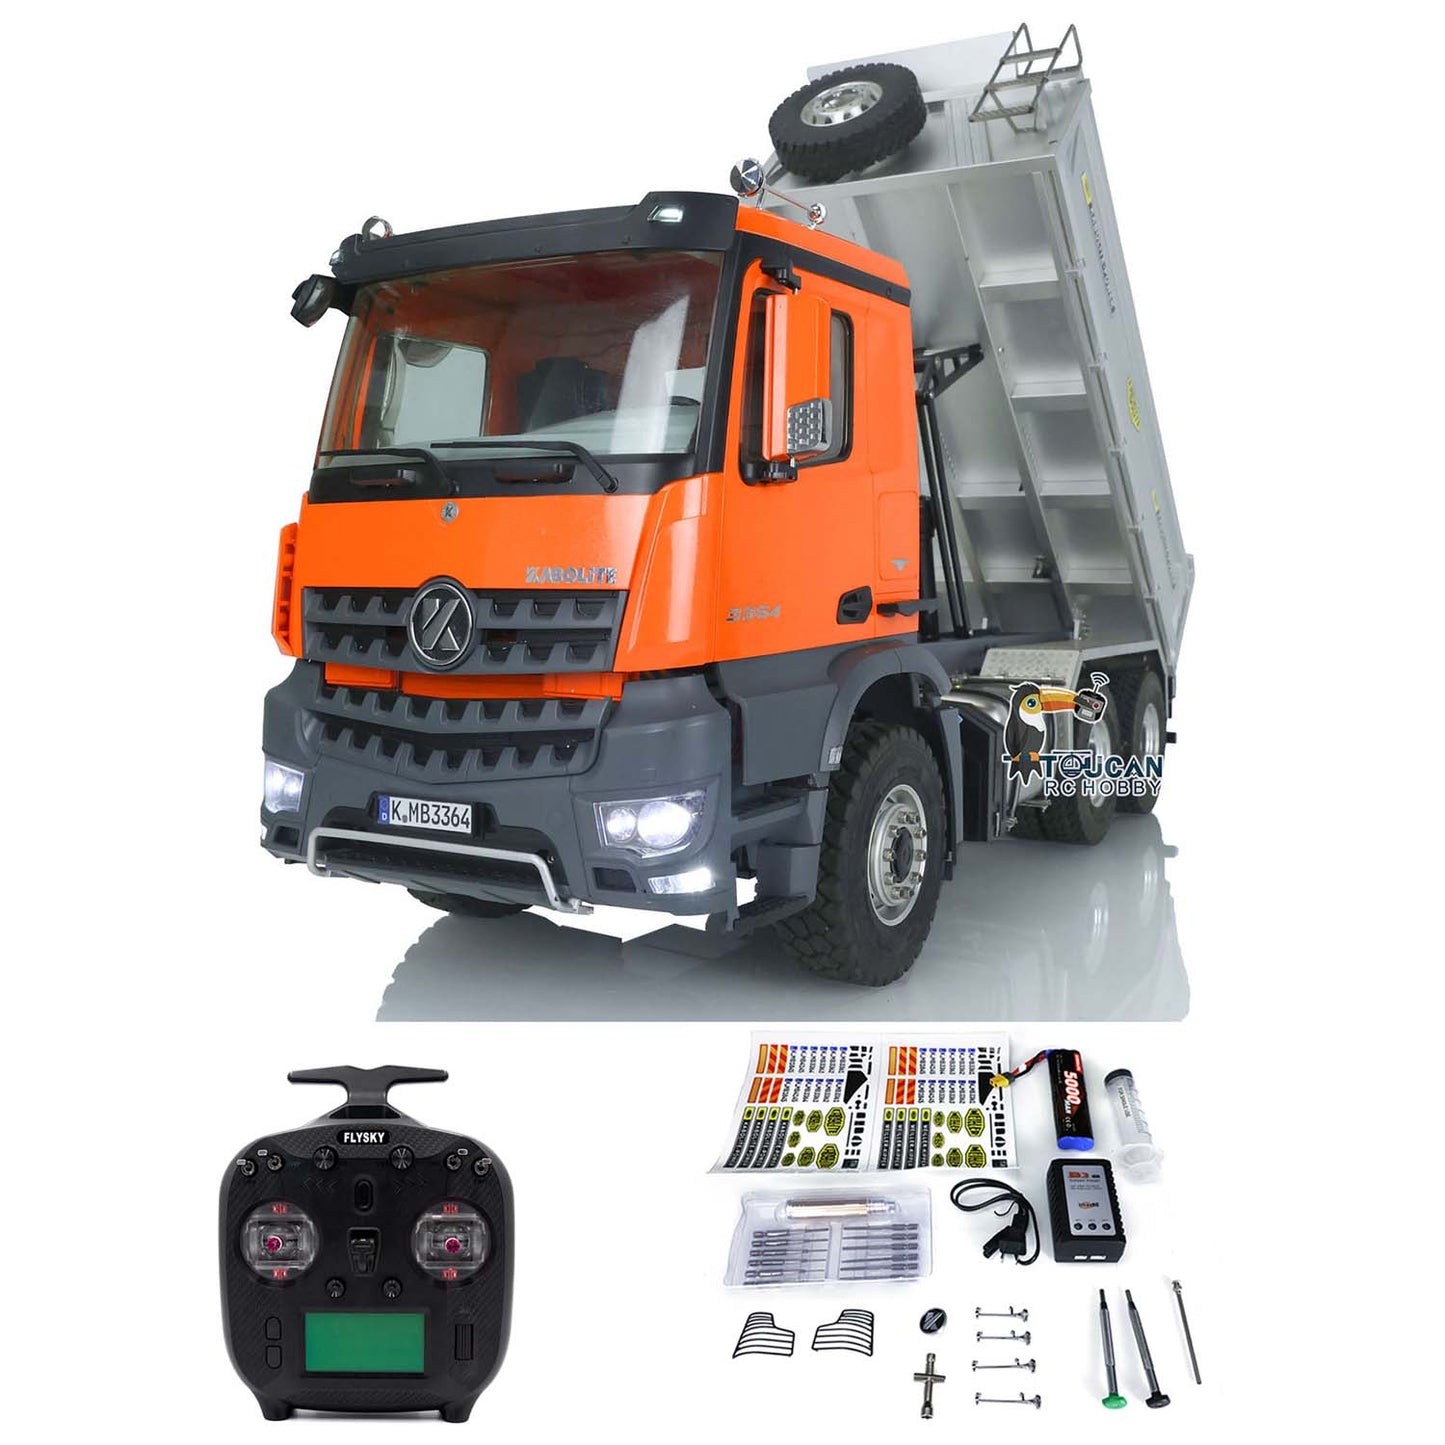 Kabolite 1/14 6*6 K3364 RC Metal Hydraulic Dump Truck Assembled and Painted Vehicles Remote Control Tipper Cars Models ESC Motor